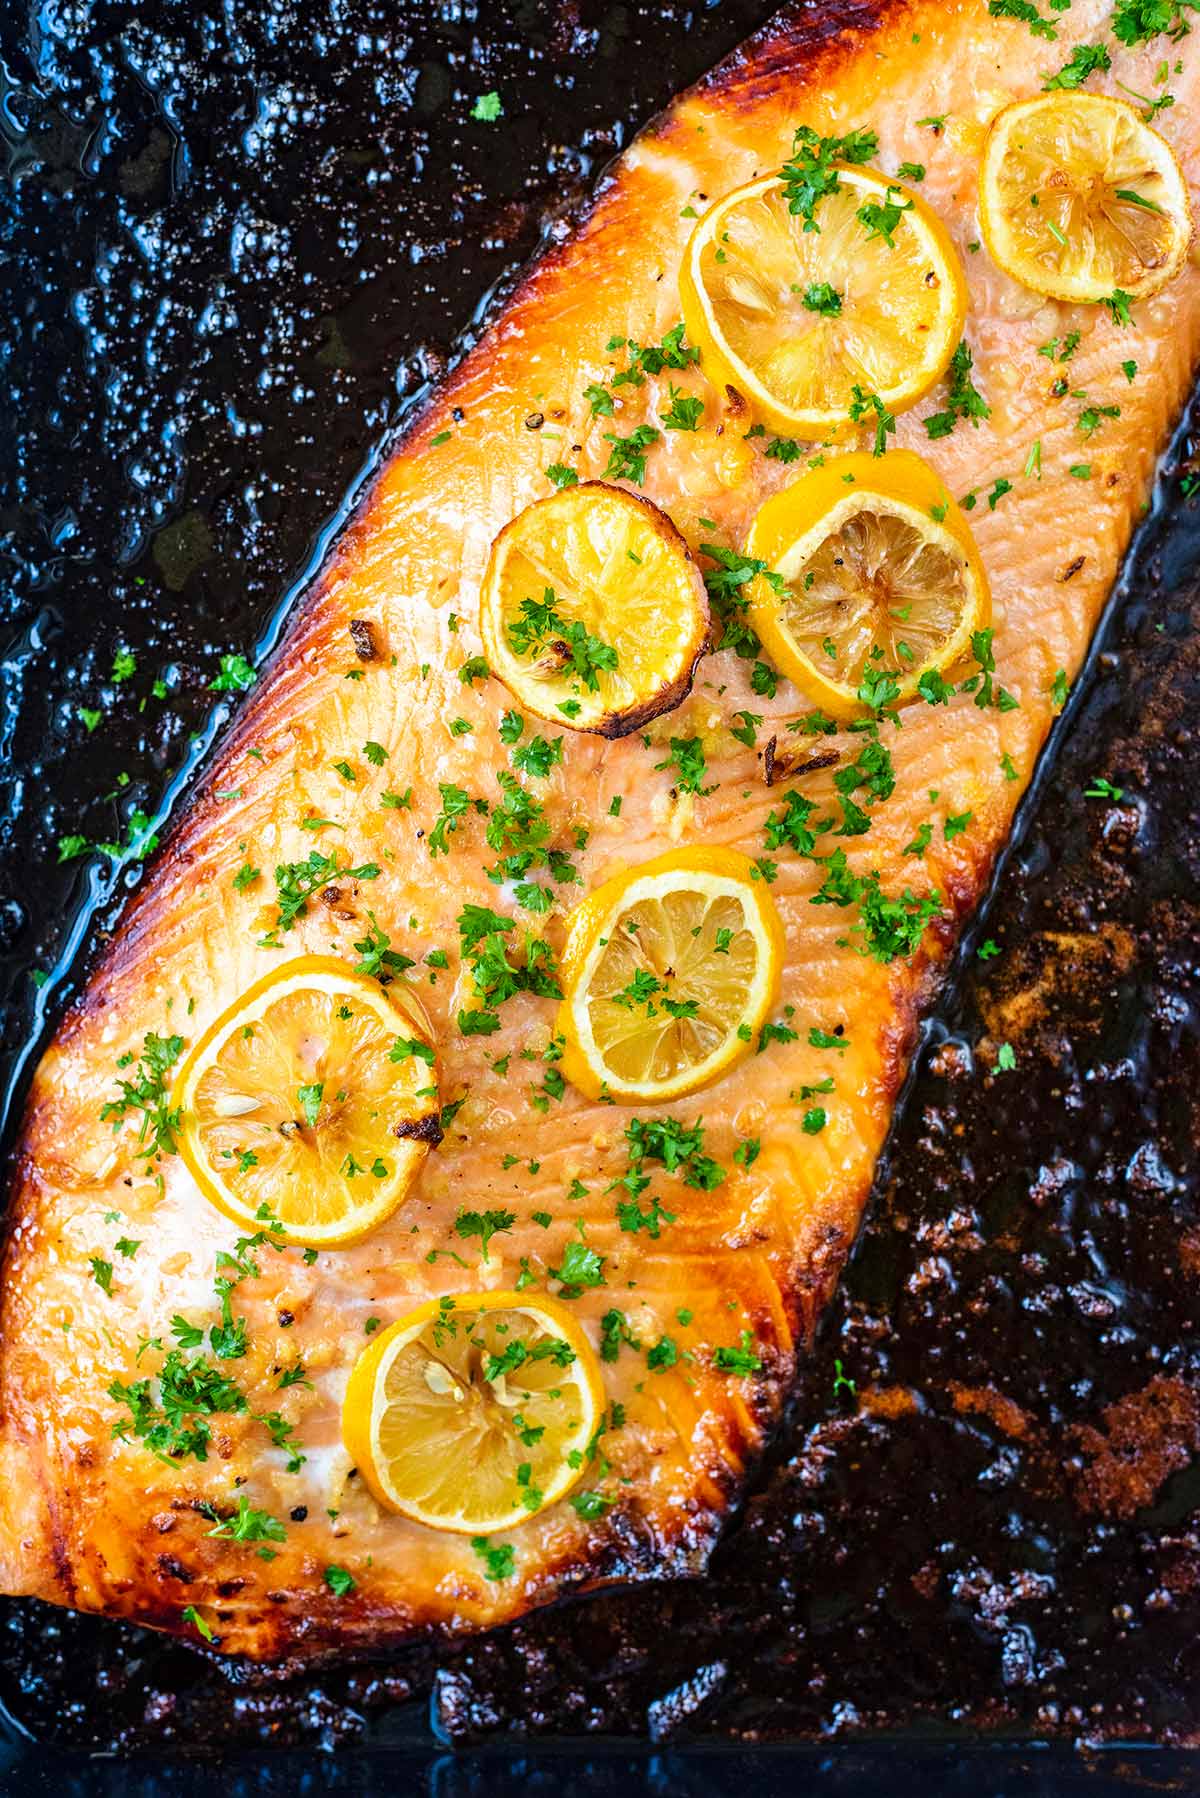 A cooked whole side of salmon topped with lemon slices.